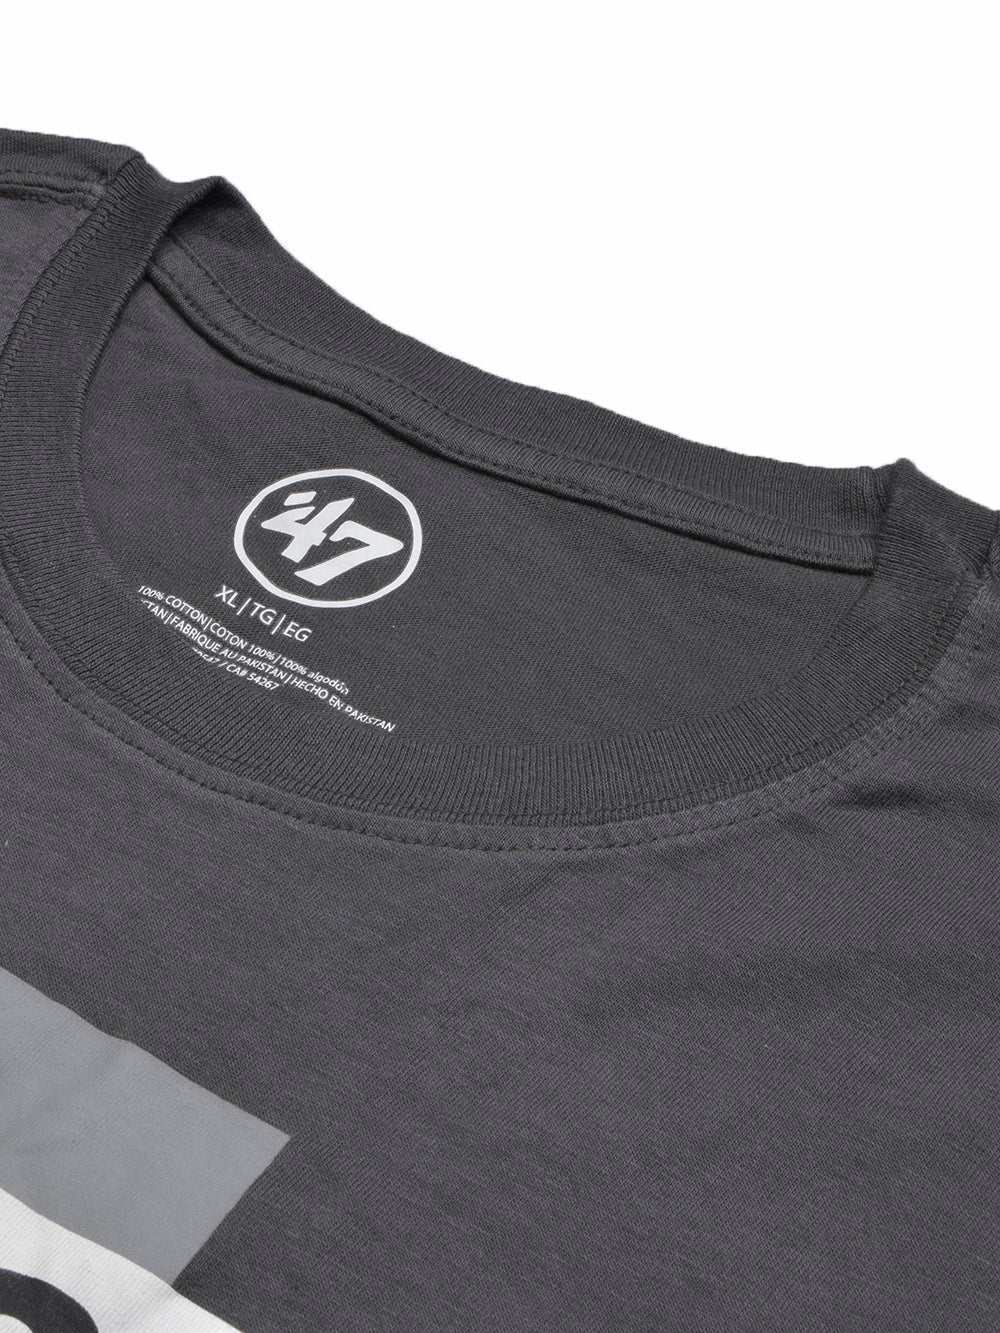 47 Single Jersey Crew Neck Tee Shirt For Men-Dark Grey with Print-BE1003/BR13243